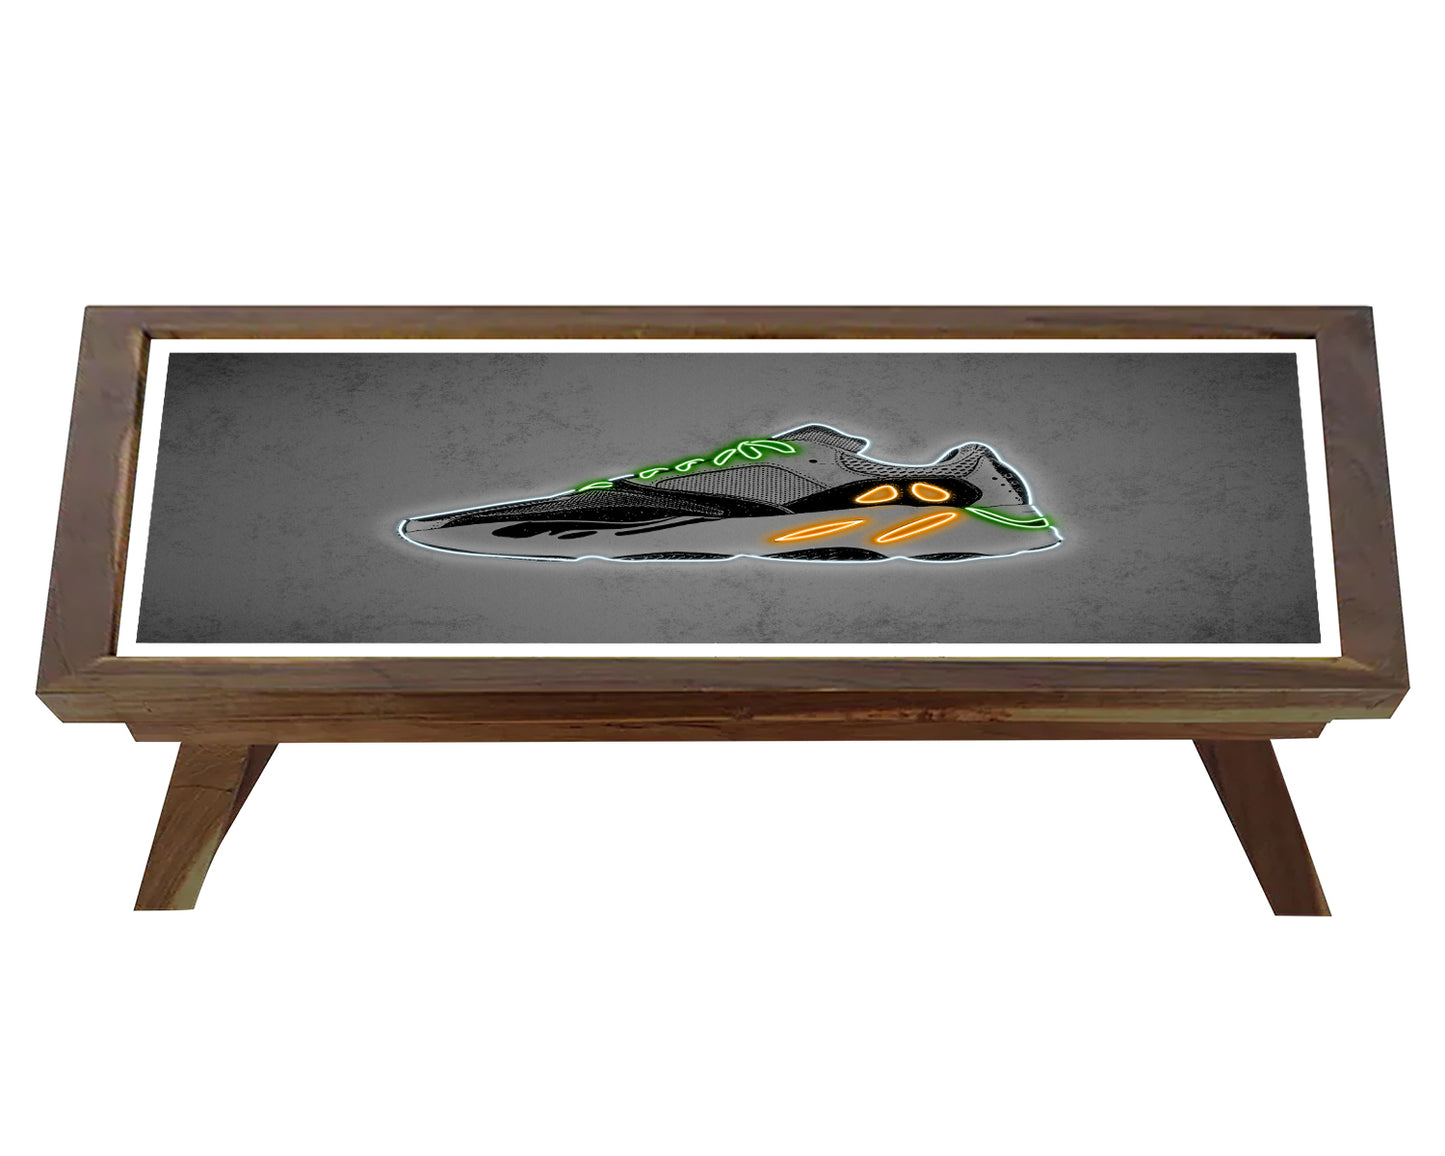 Yeezy Wave Runner Shoes Neon Effect Coffee and Laptop Table 